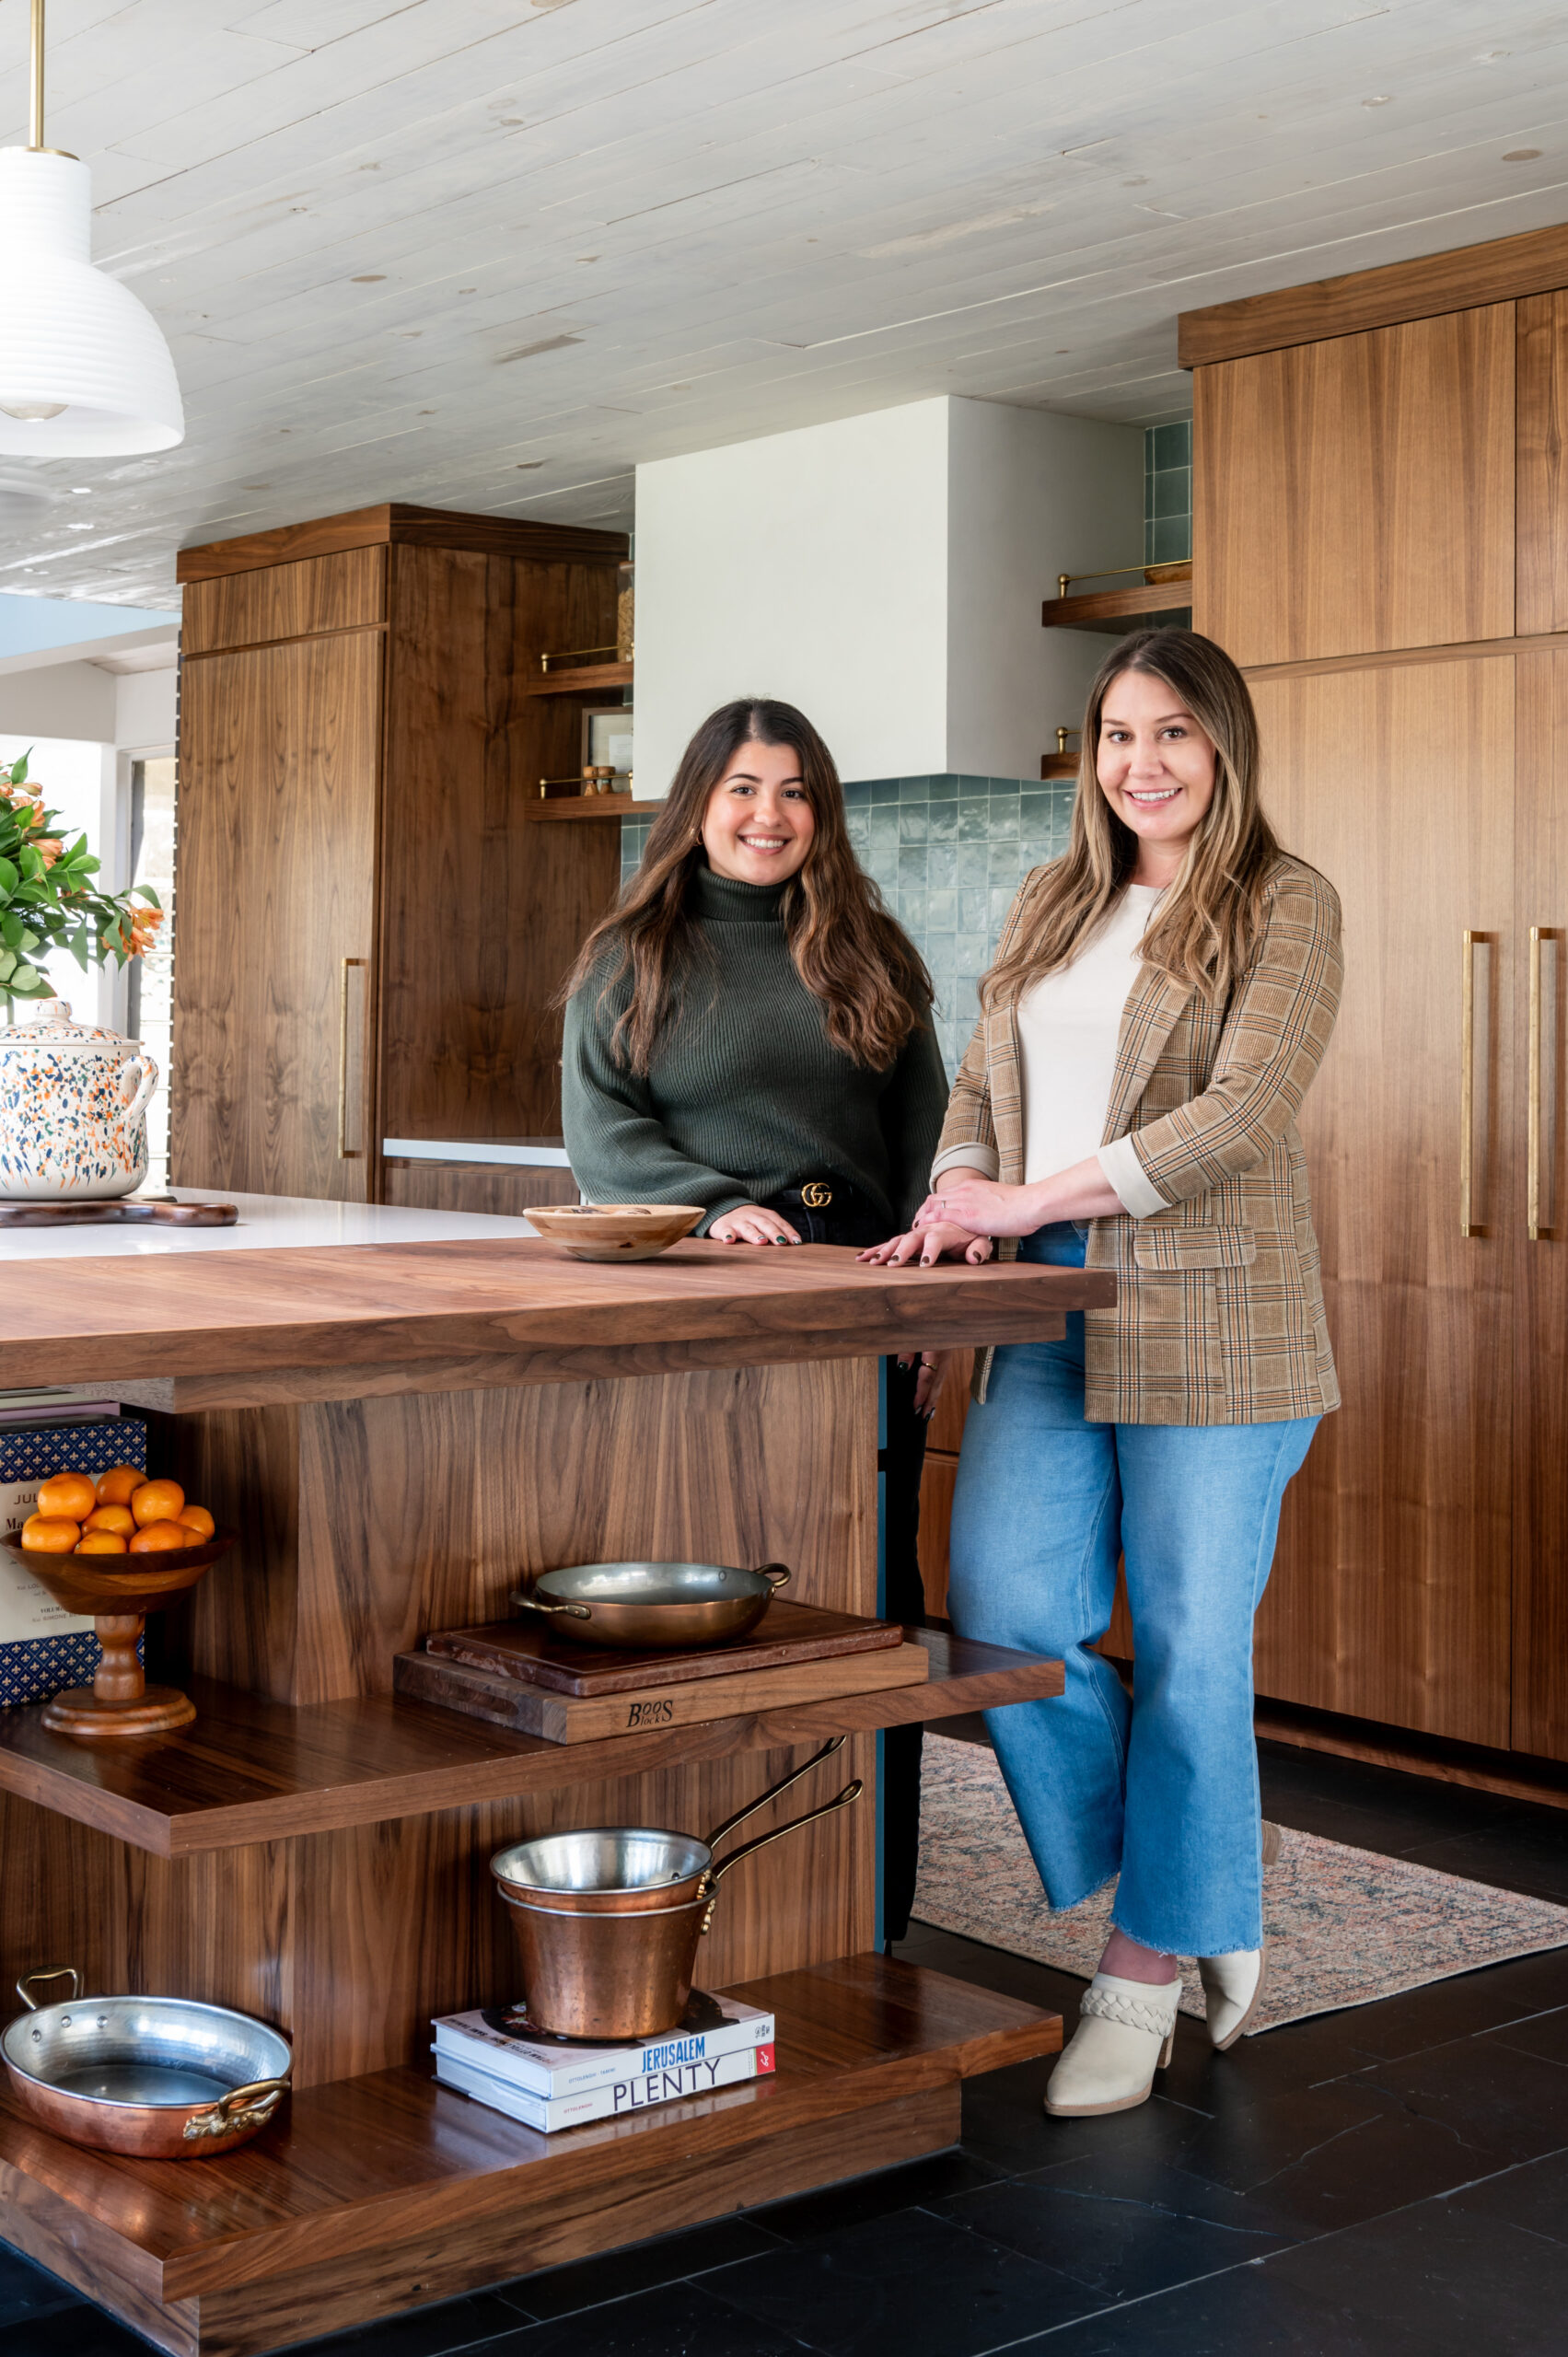 Two women smiling in a beautiful kitchen for her interior design and brand photography shoot